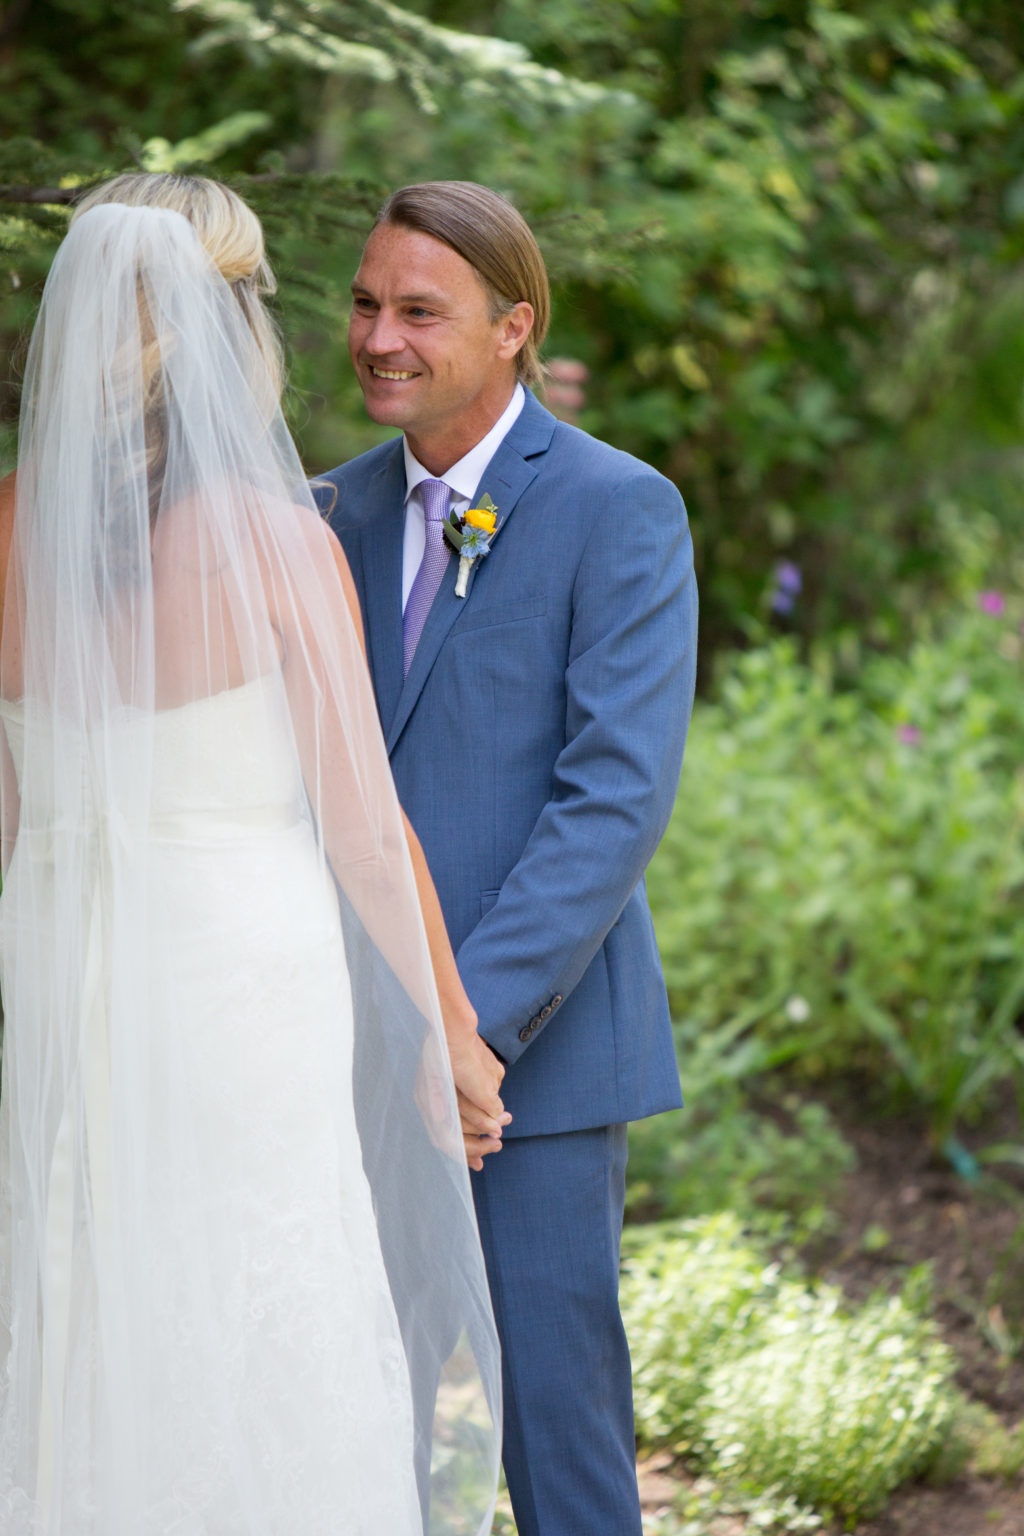 Betty Ford Alpine Gardens bride and groom first look before vail golf course wedding